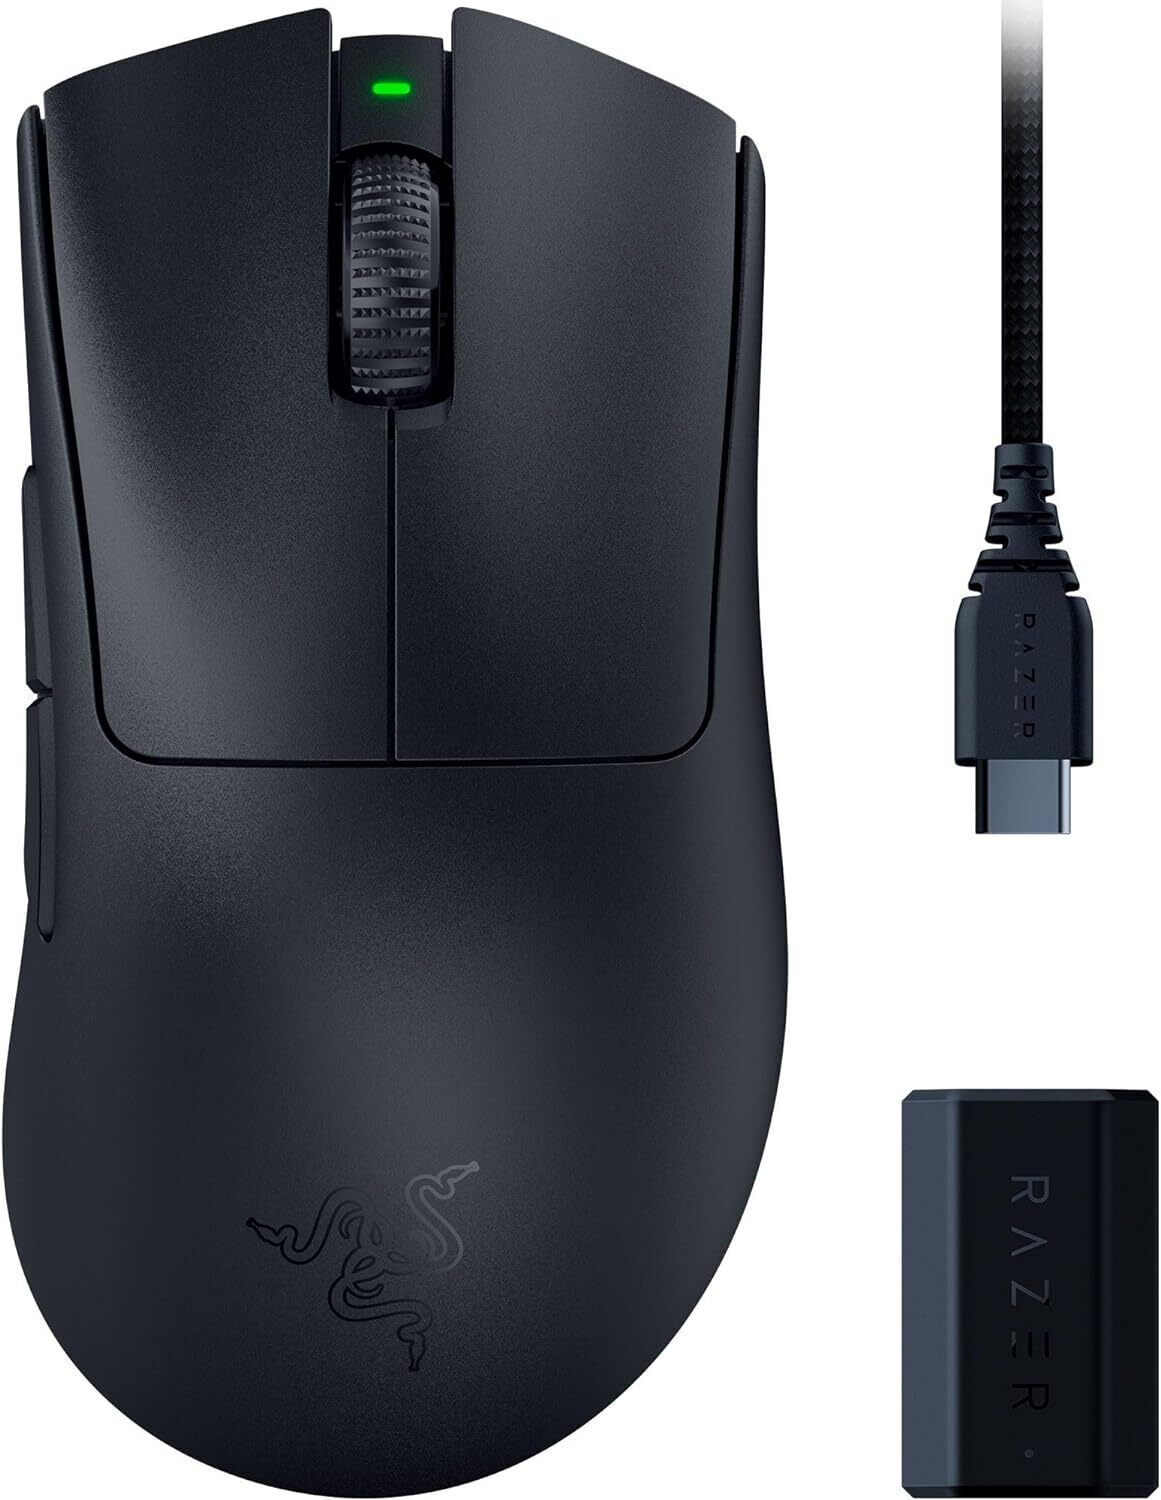 Razer DeathAdder V3 Pro Wireless Gaming Mouse and Dongle Certified Refurbished